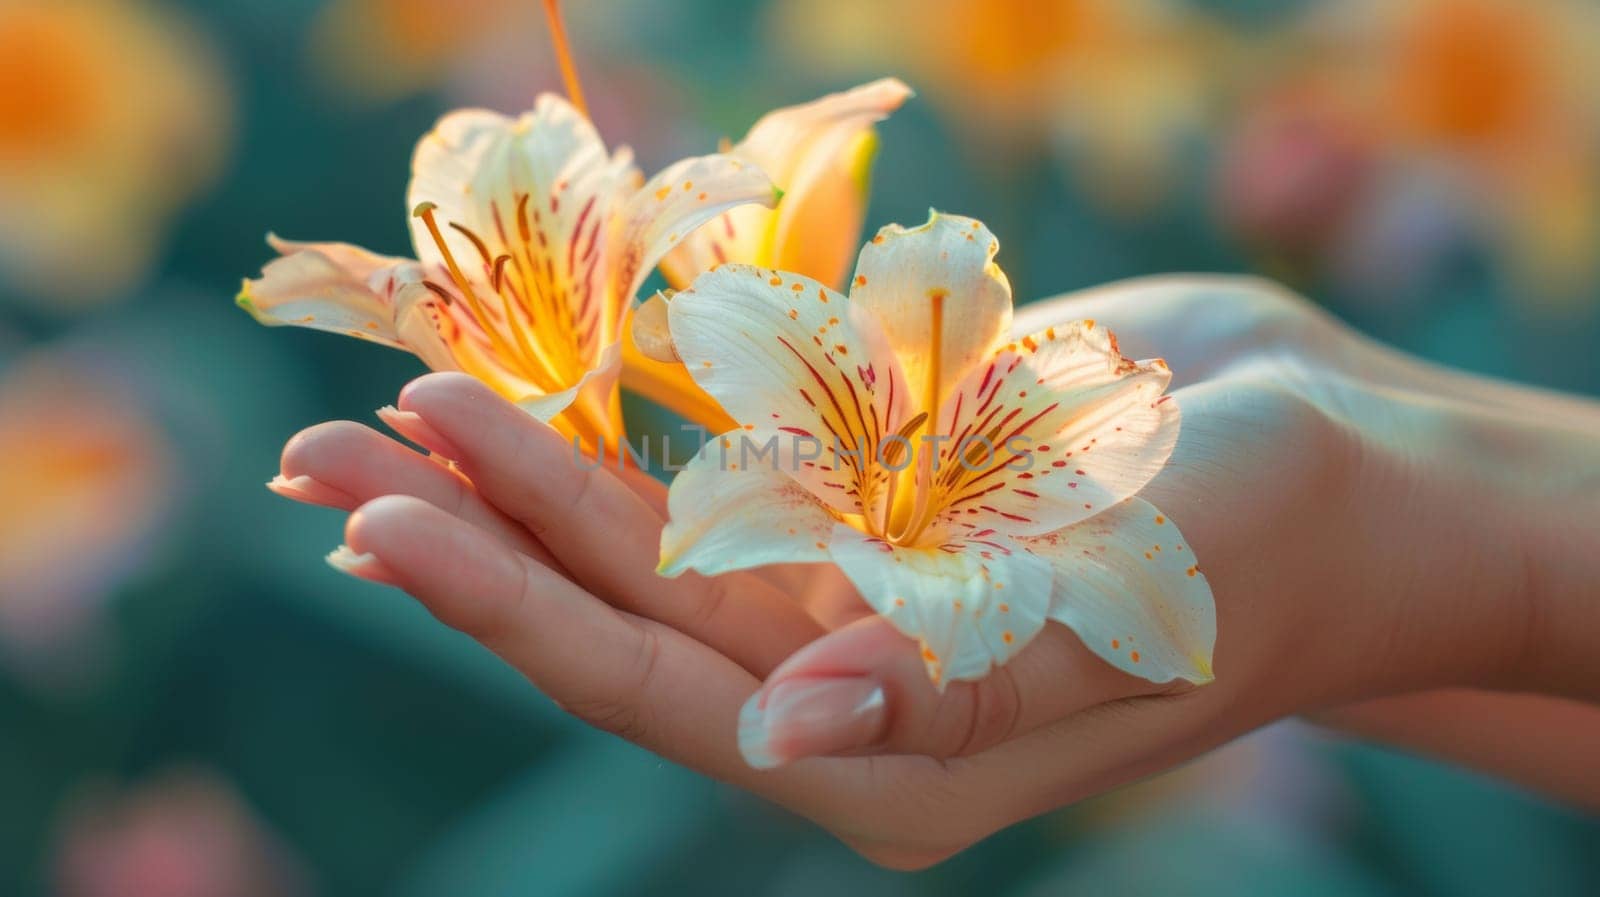 A person holding a flower in their hand with some blurry background, AI by starush